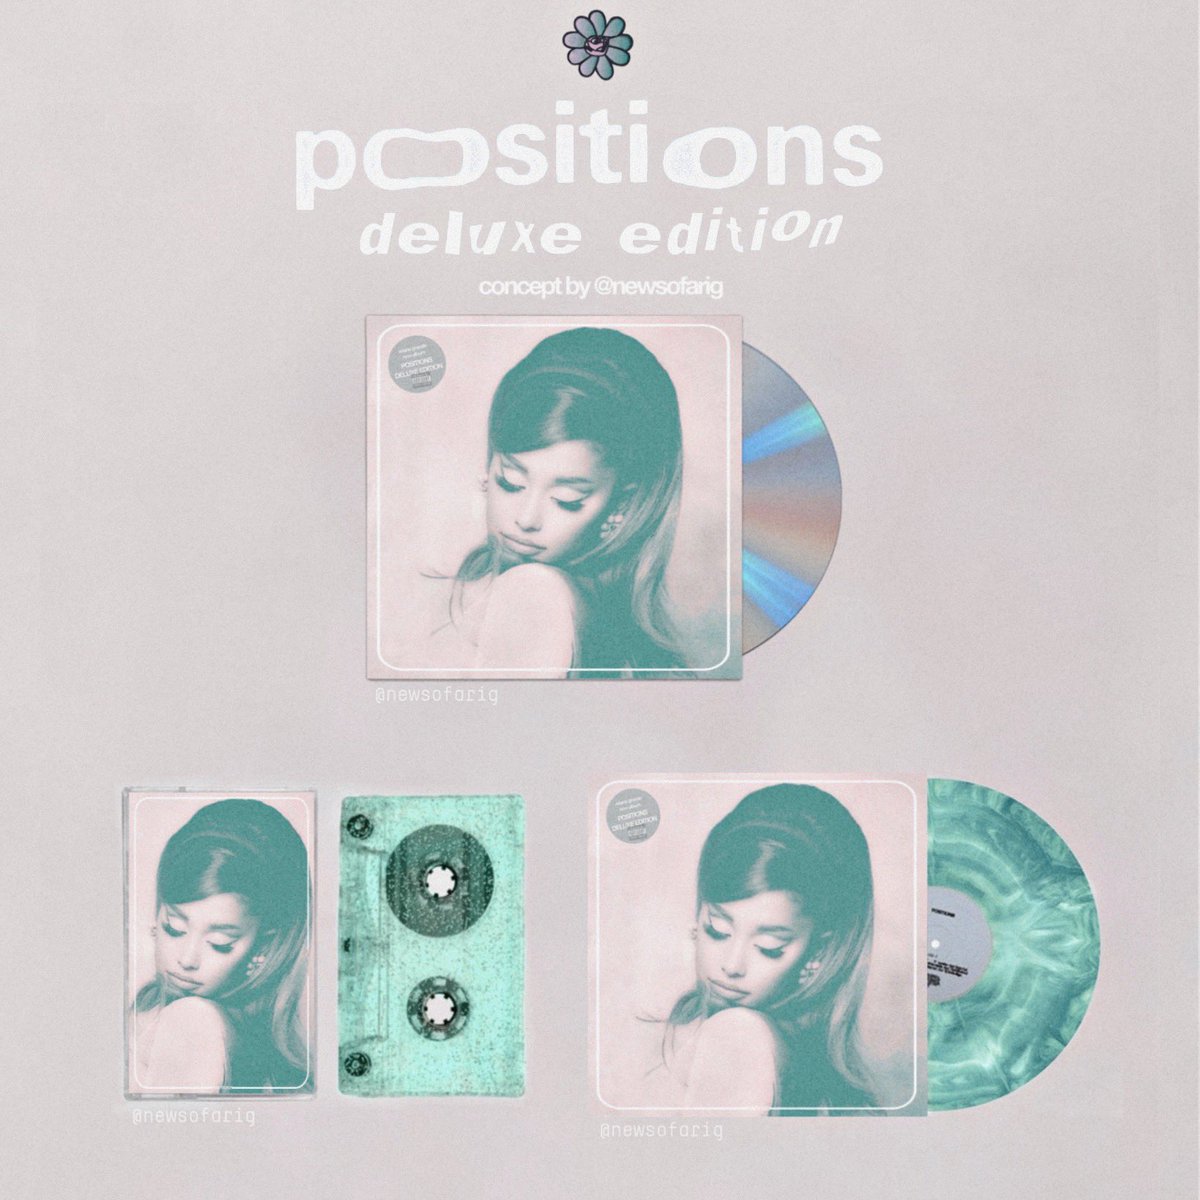 Lucas💋 on X: positions - deluxe edition (cd, vinyl & cassette)🤍☁️  concept by me✨ @ArianaGrande @TeamAriana #ag6 #positions   / X